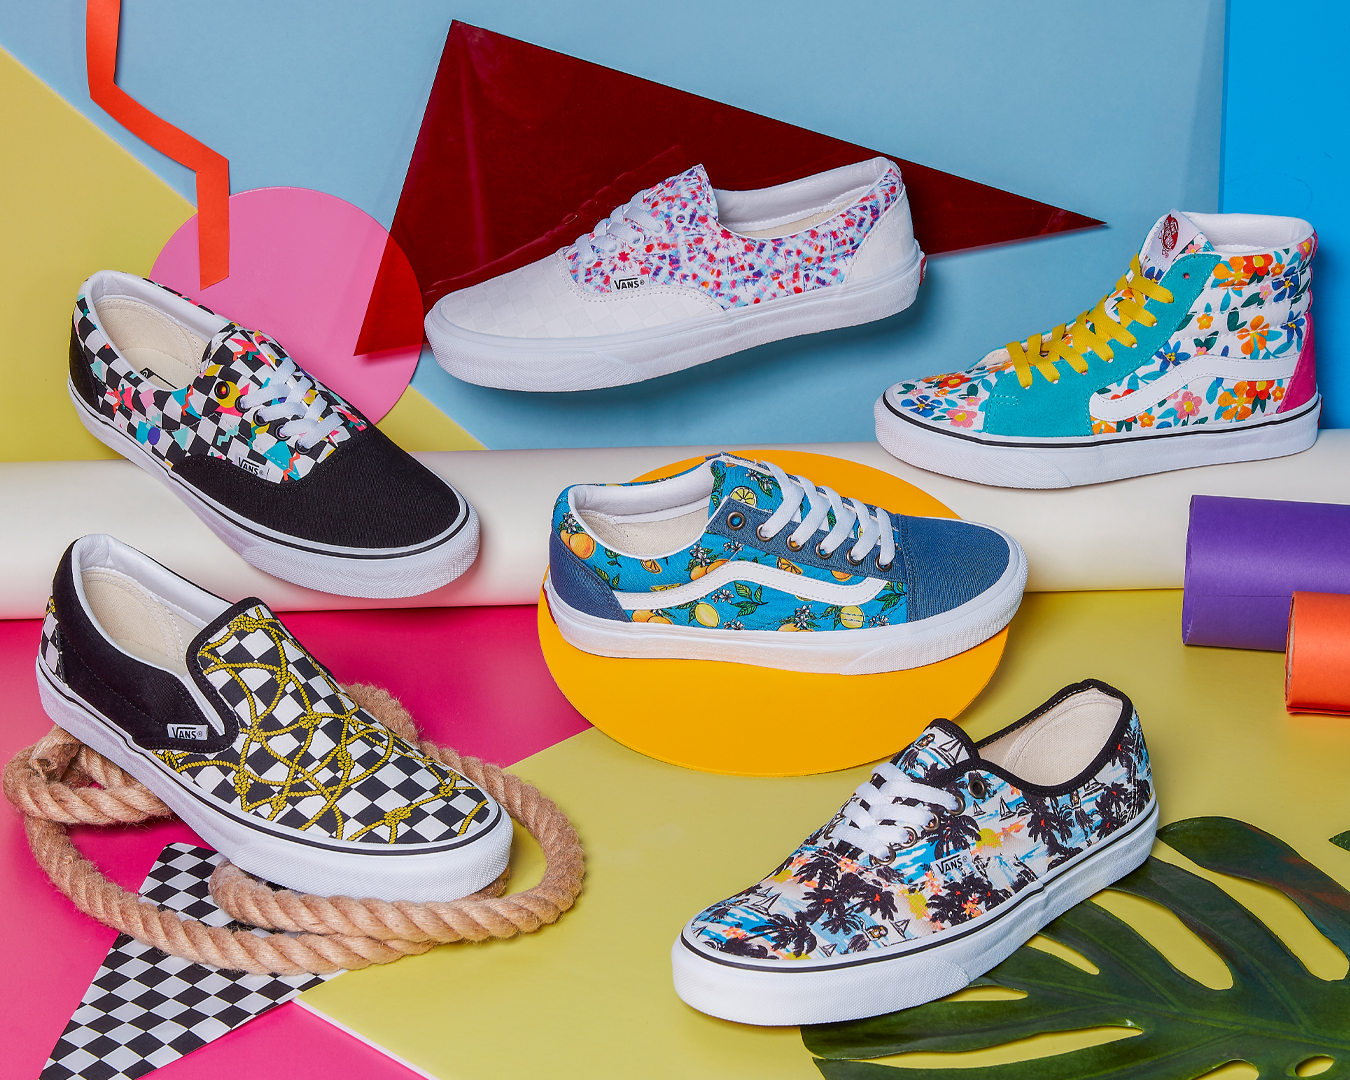 Vans on Twitter: "Get creative and design your own pair of with new prints. Available now at https://t.co/f5ezIotTWR https://t.co/eEUKiCT3TB" / Twitter